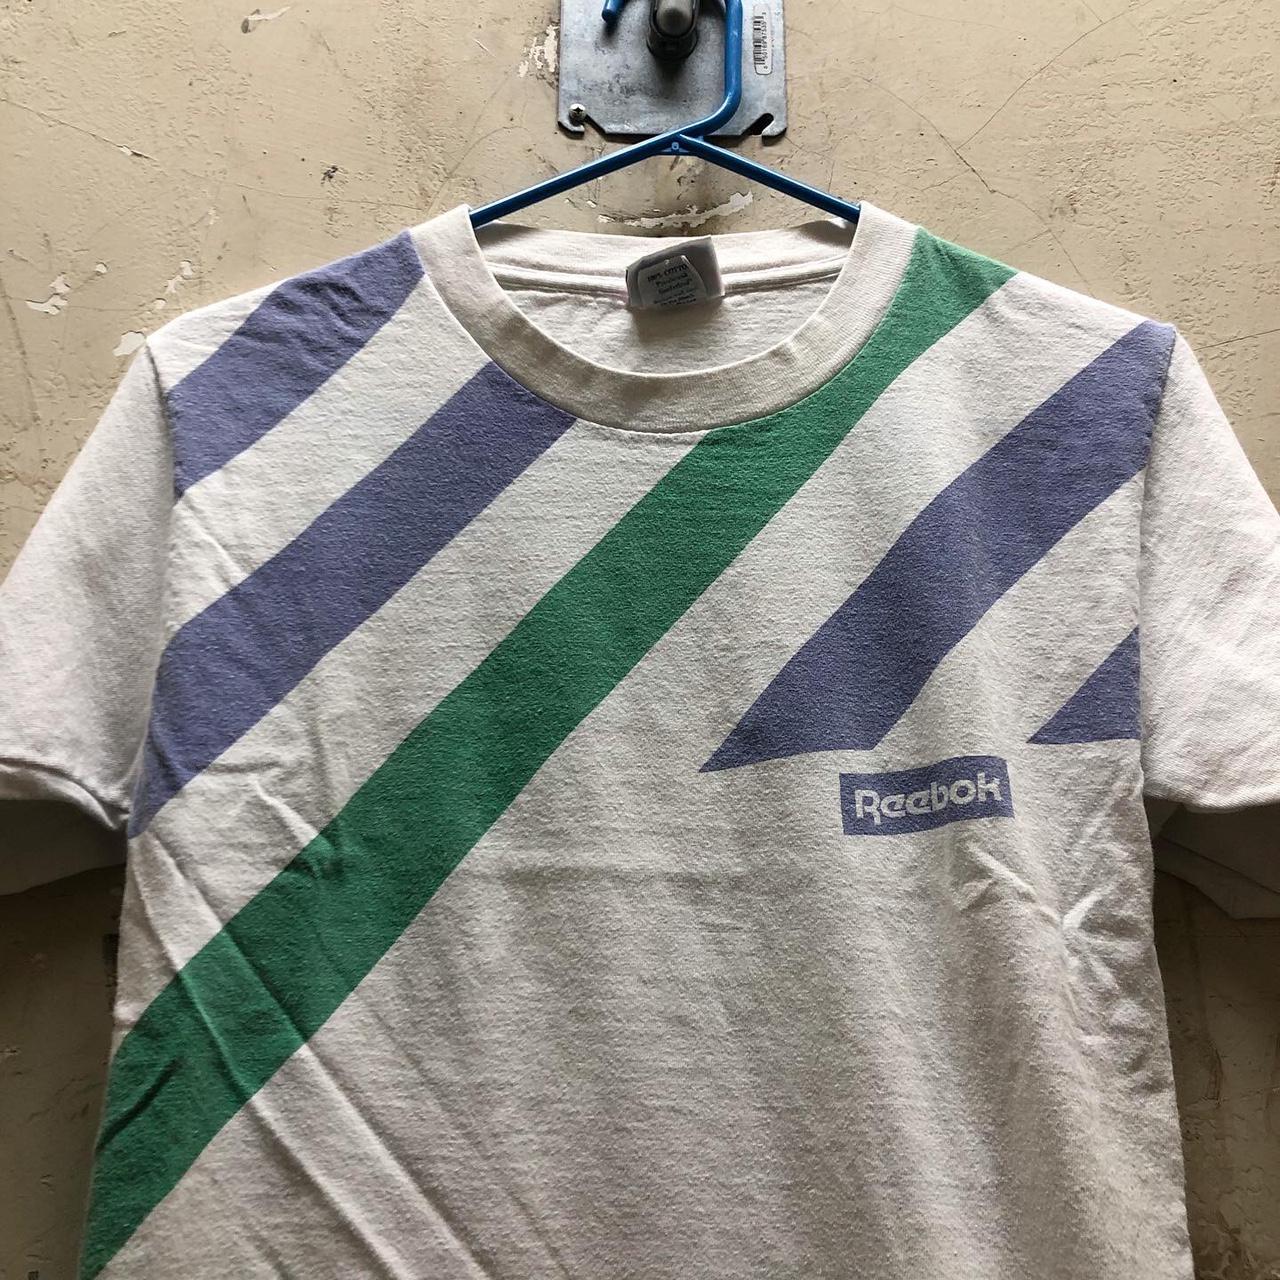 Product Image 2 - Vintage 1980s Reebok Graphic T-Shirt
-